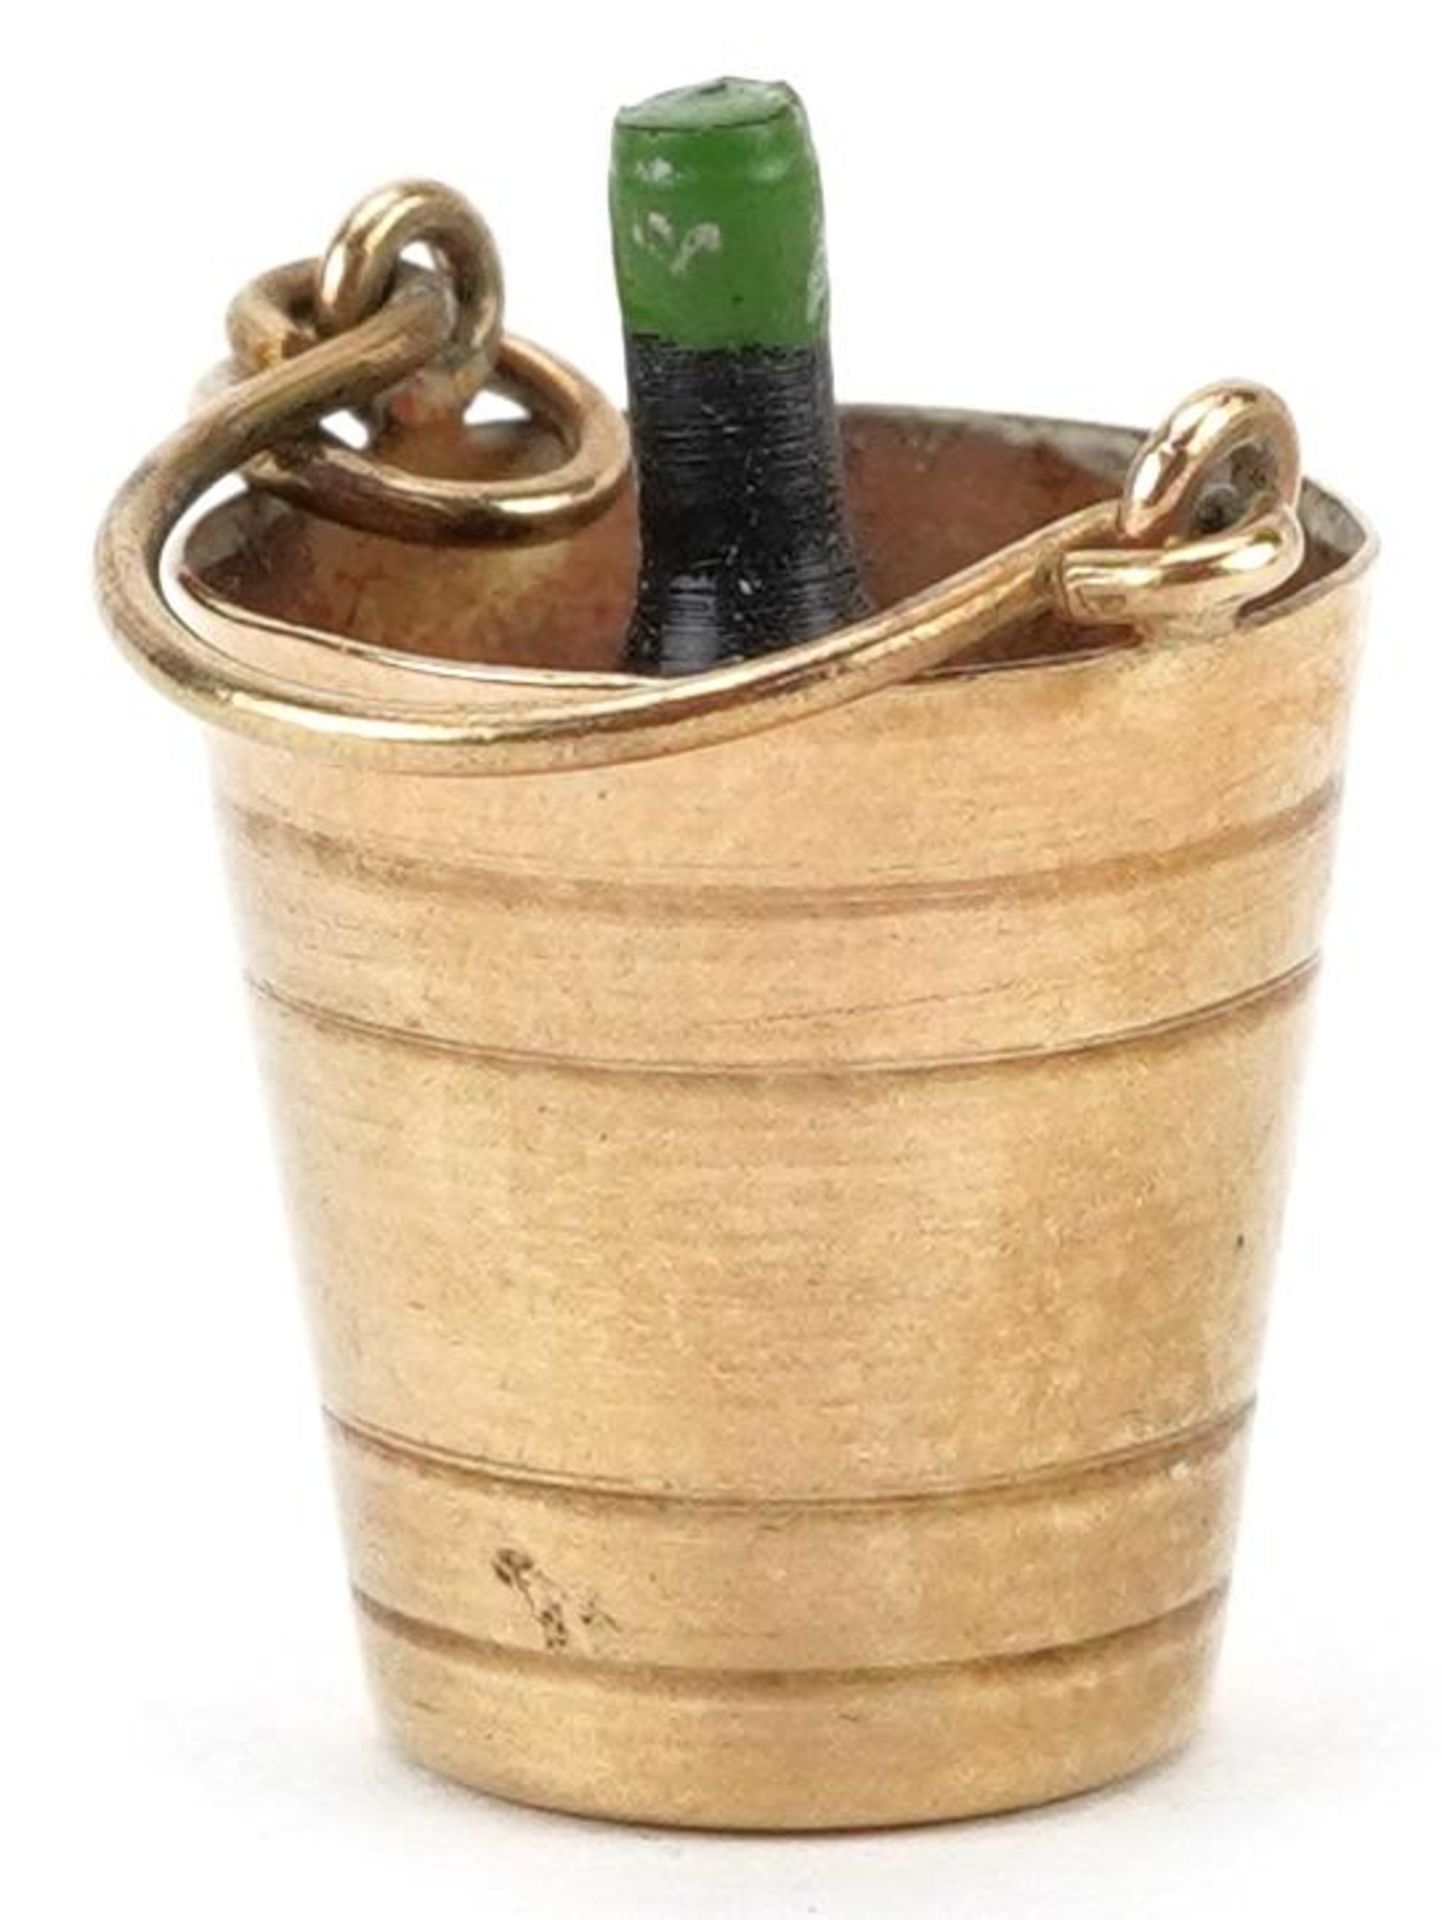 9ct gold charm in the form of a bottle of Champagne in an ice bucket with swing handle, 2.3cm - Image 2 of 3